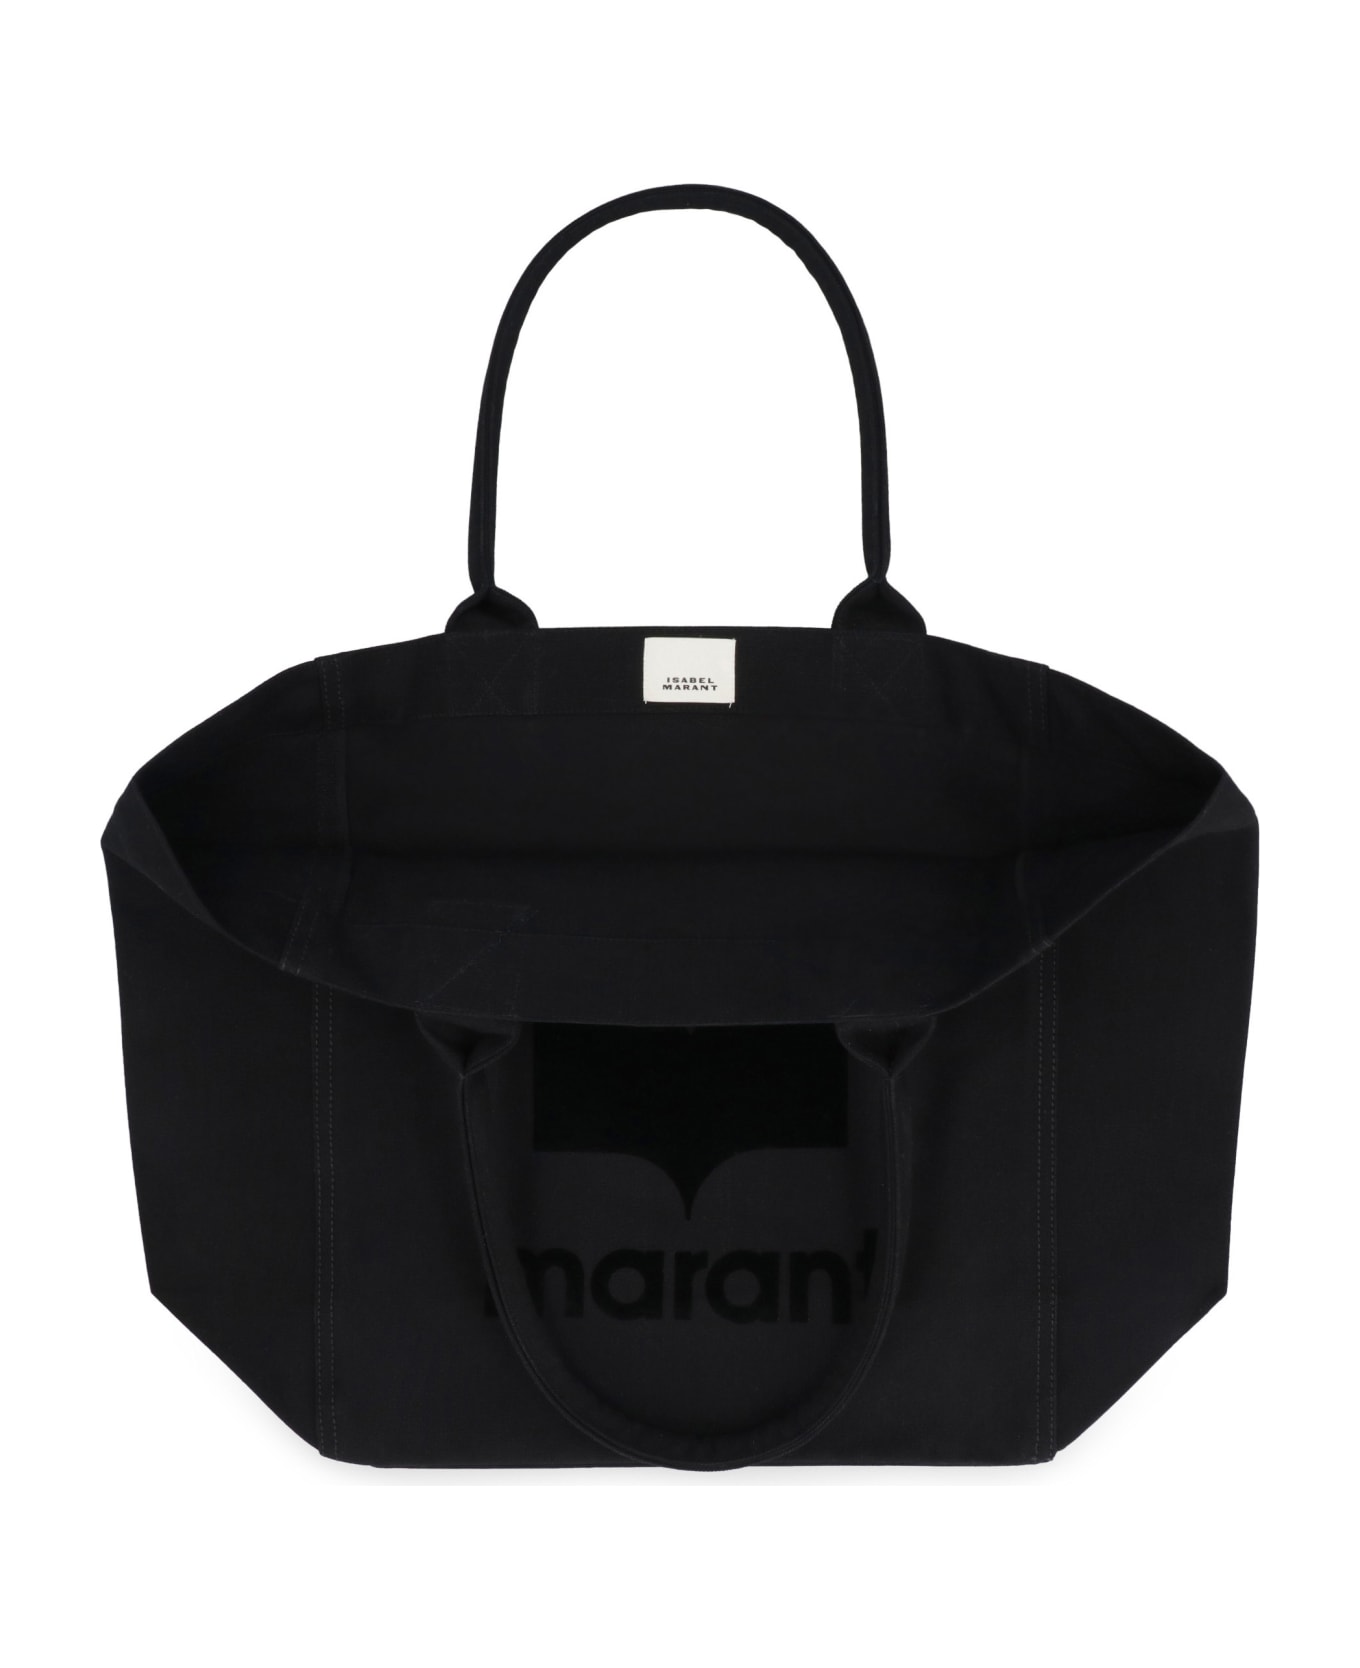 Isabel Marant Yenky Canvas Tote Bag - .